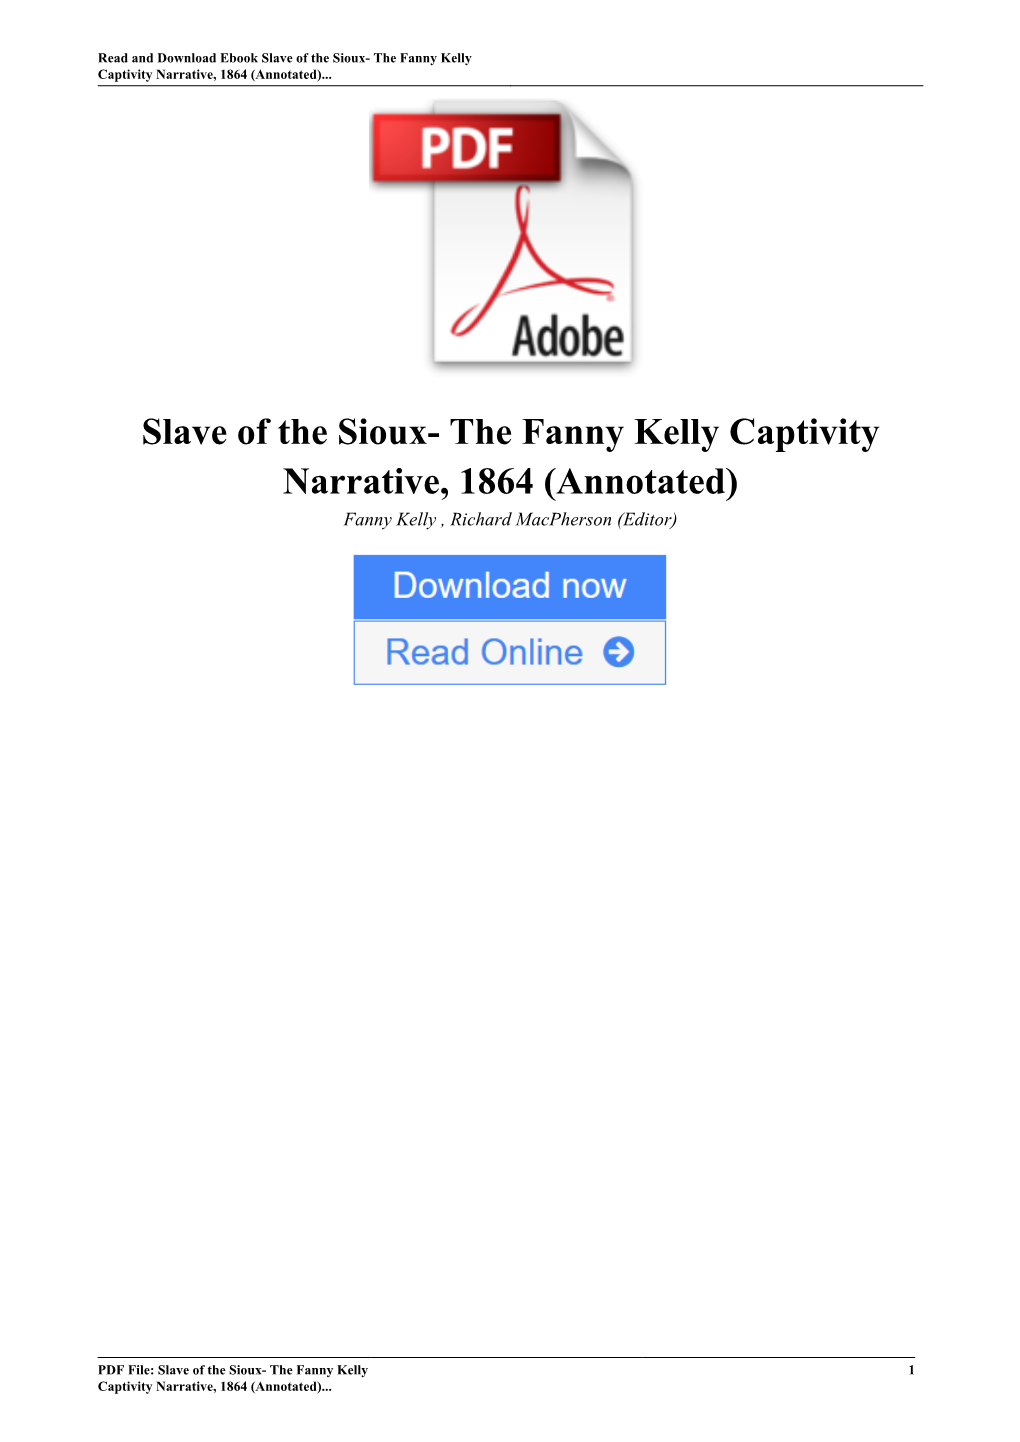 Slave of the Sioux- the Fanny Kelly Captivity Narrative, 1864 (Annotated) by Fanny Kelly , Richard Macpherson (Editor)